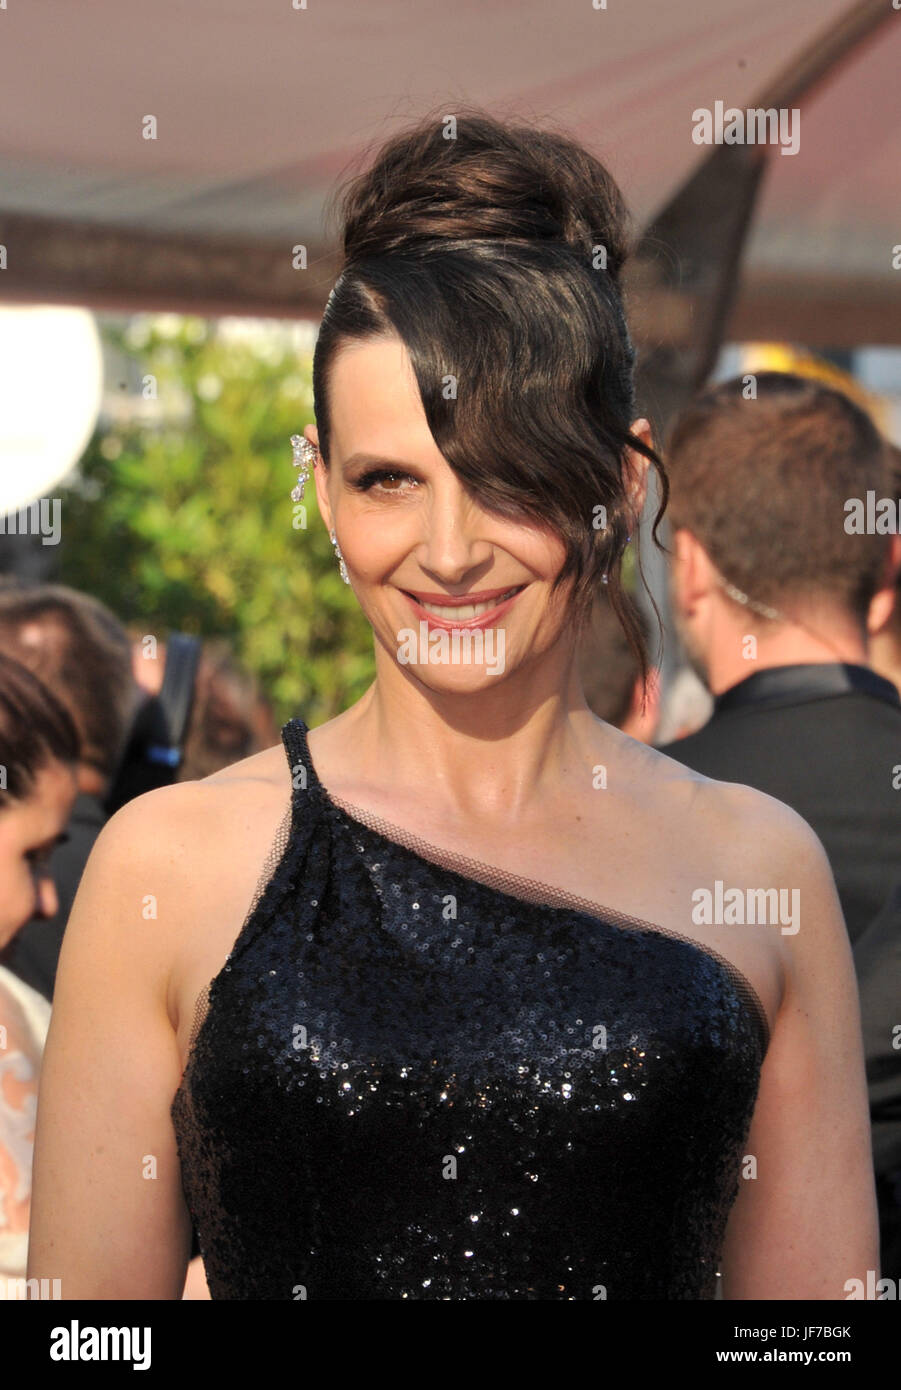 Closing Ceremony of the 70th annual Cannes Film Festival at the Palais des Festivals in Cannes, France.  Featuring: Juliette Binoche Where: Cannes, France When: 28 May 2017 Credit: IPA/WENN.com  **Only available for publication in UK, USA, Germany, Austria, Switzerland** Stock Photo